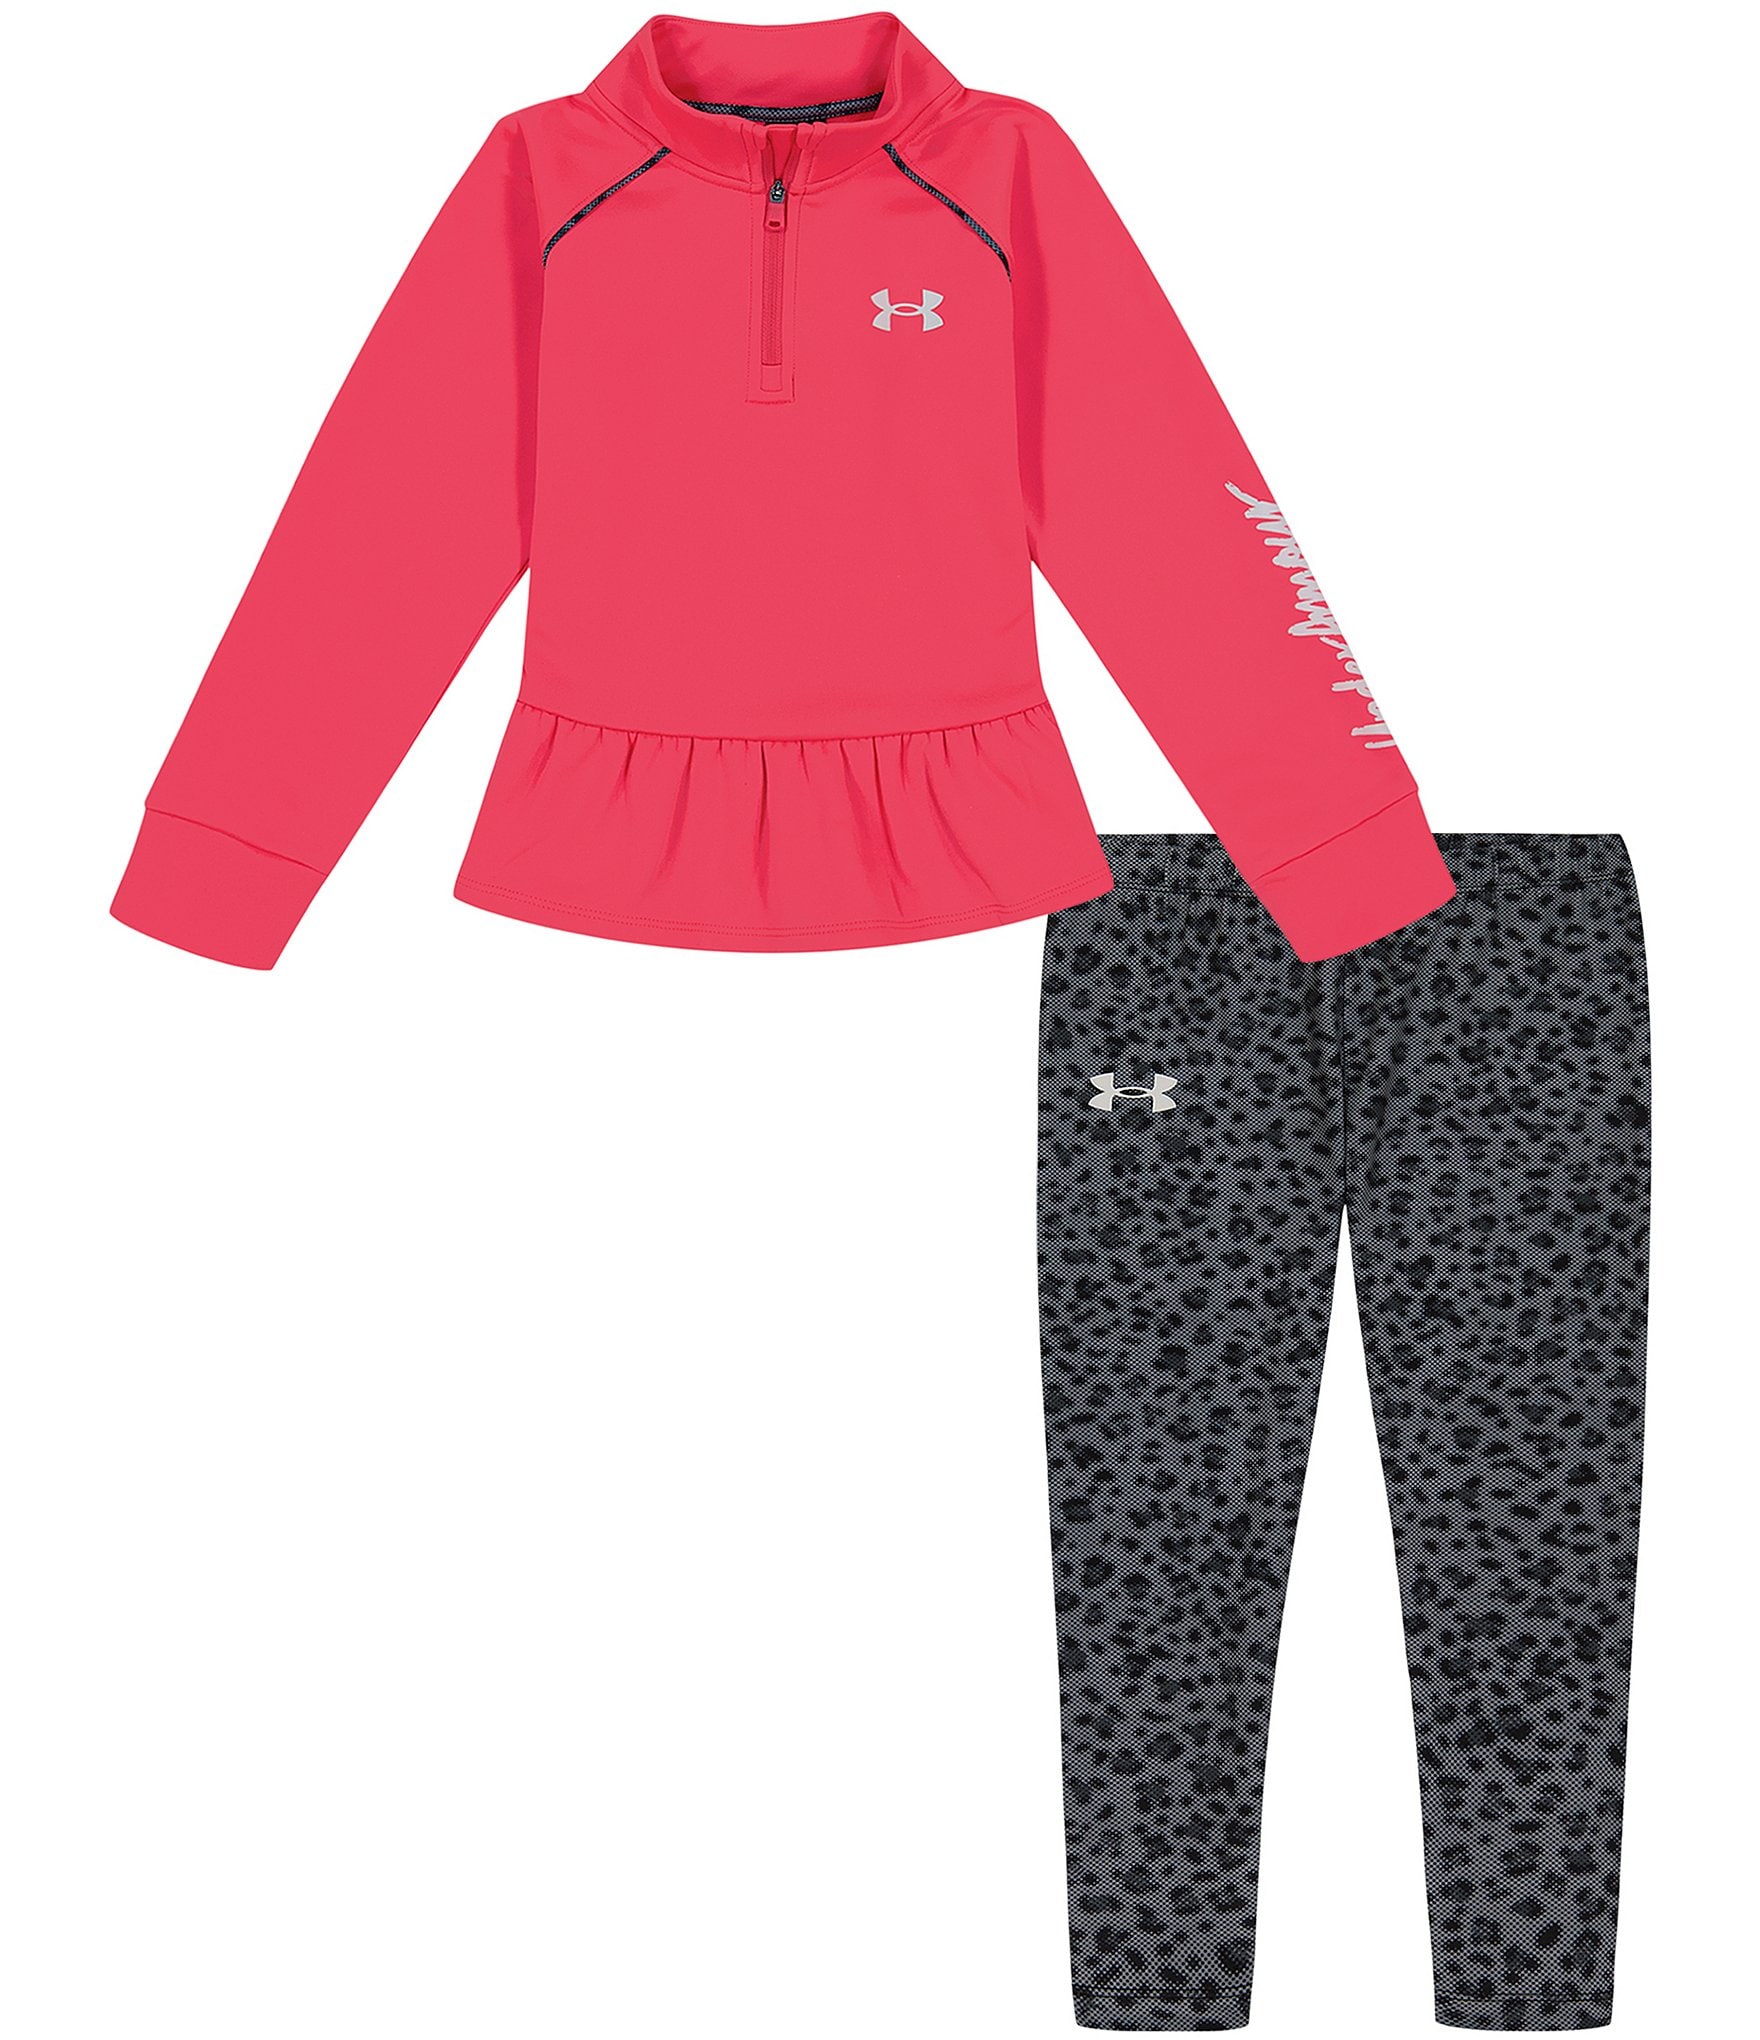 Under Armour Little Girls Leopard Print Hoodie and Leggings Set